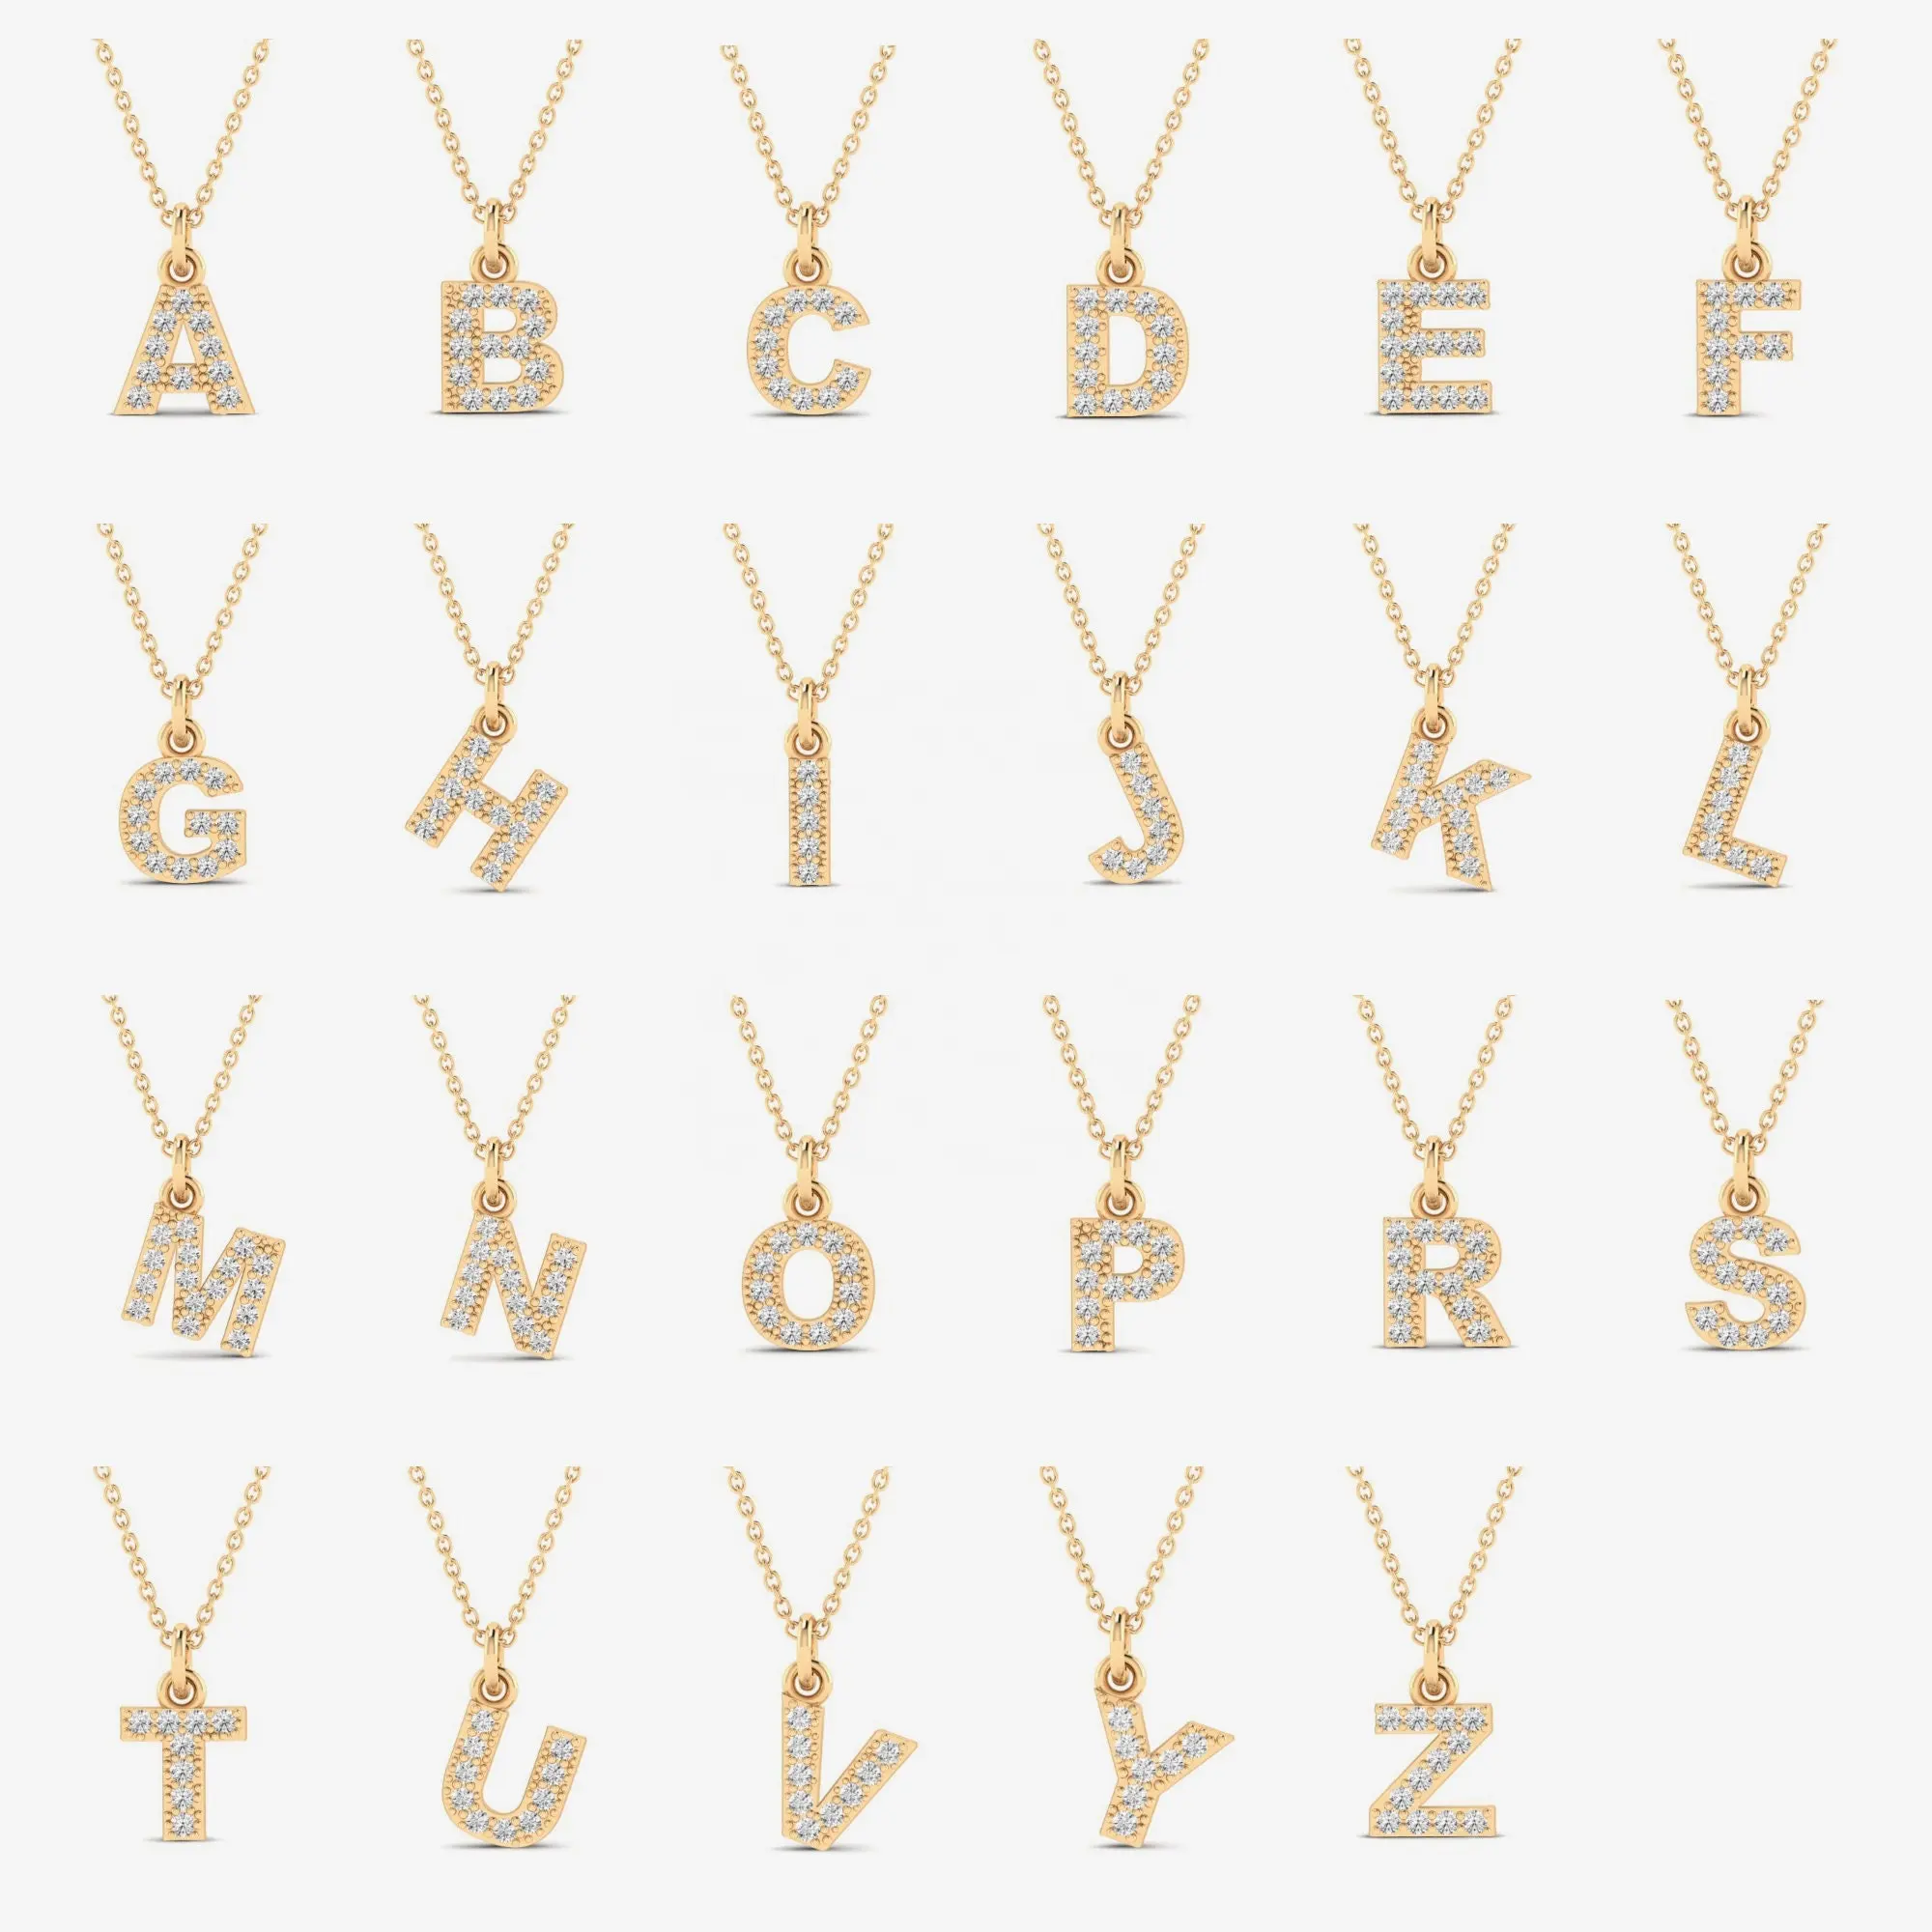 Speedin Jewelry Real Gold Alphabet Charm Polished Letter Pendant Set Trend 14K Solid Gold Diamond Pendant for Necklace